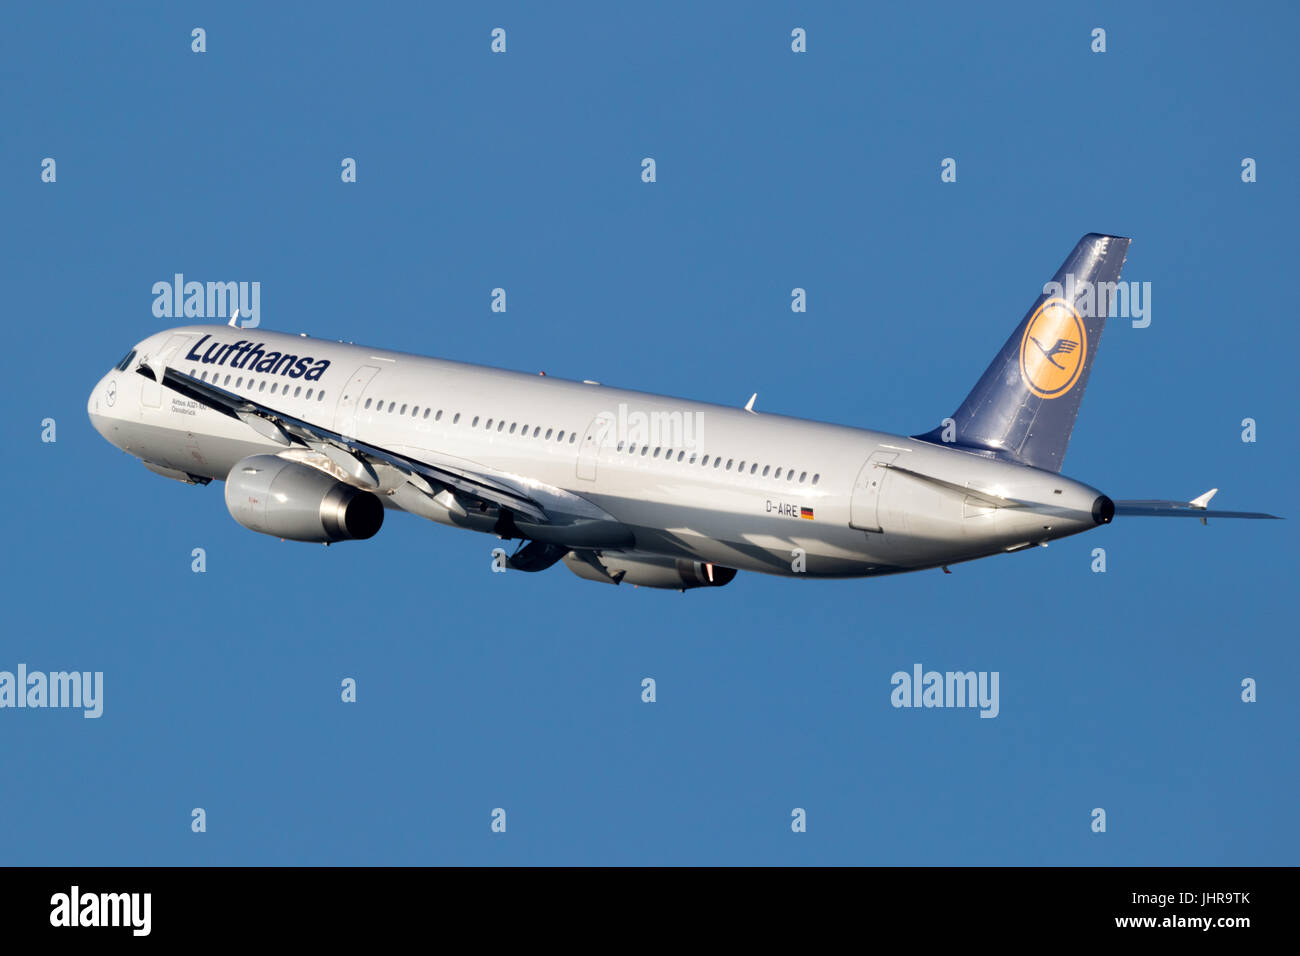 DUSSELDORF, GERMANY - DEC 16, 2016: Airbus A321 airplane from Lufthansa airline departing from Dusseldorf airport Stock Photo